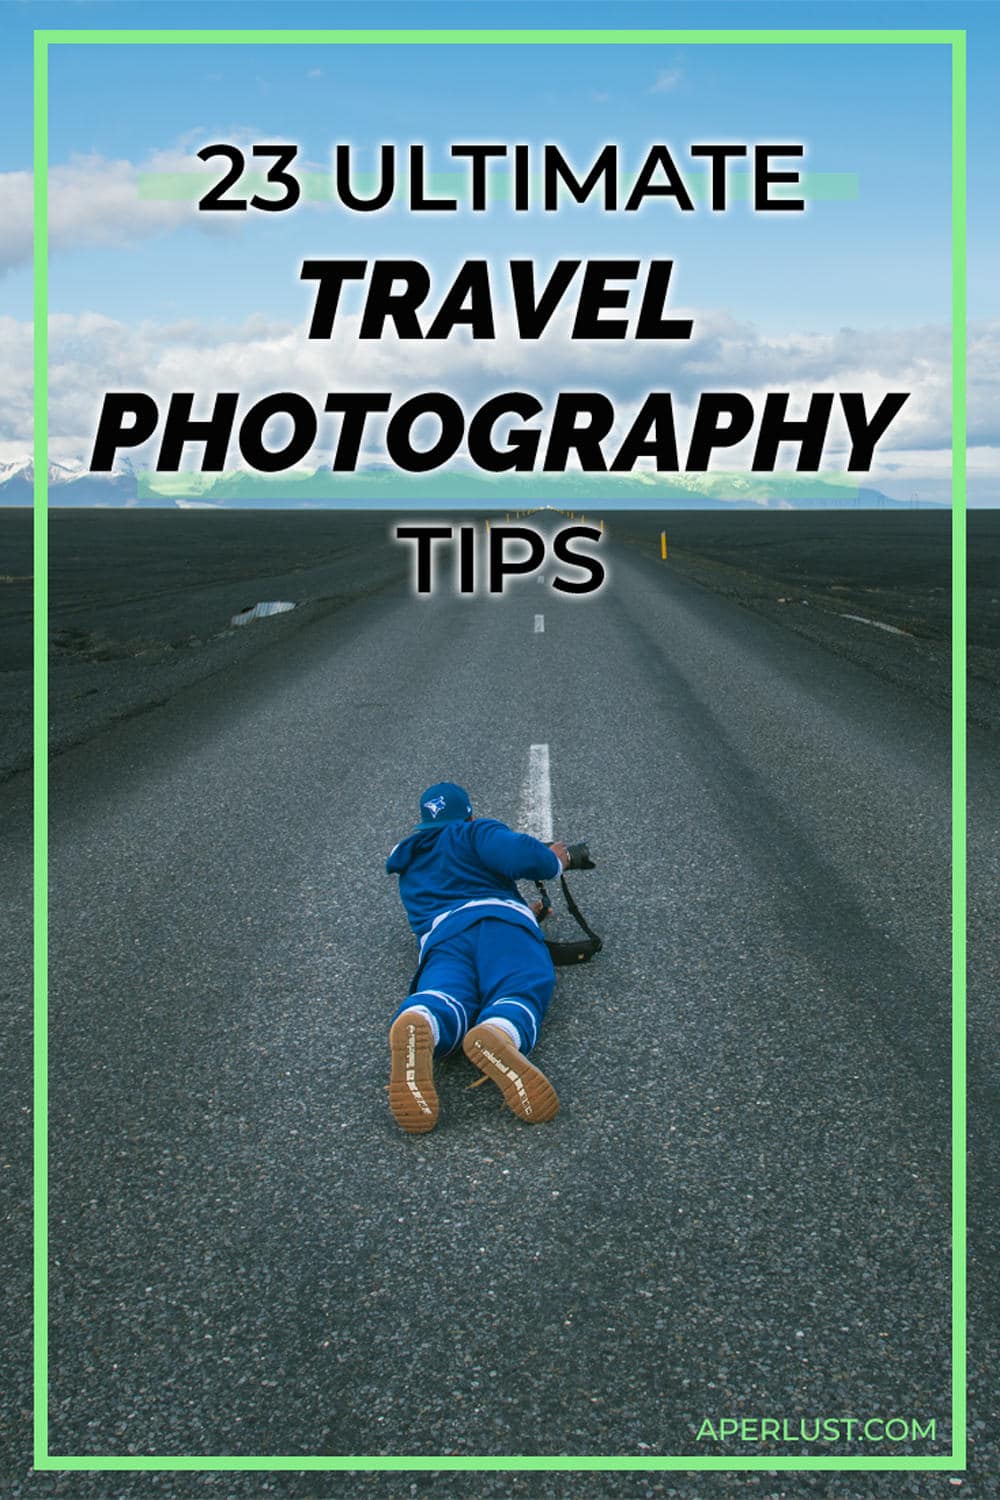 23 Ultimate Travel Photograpy Tips